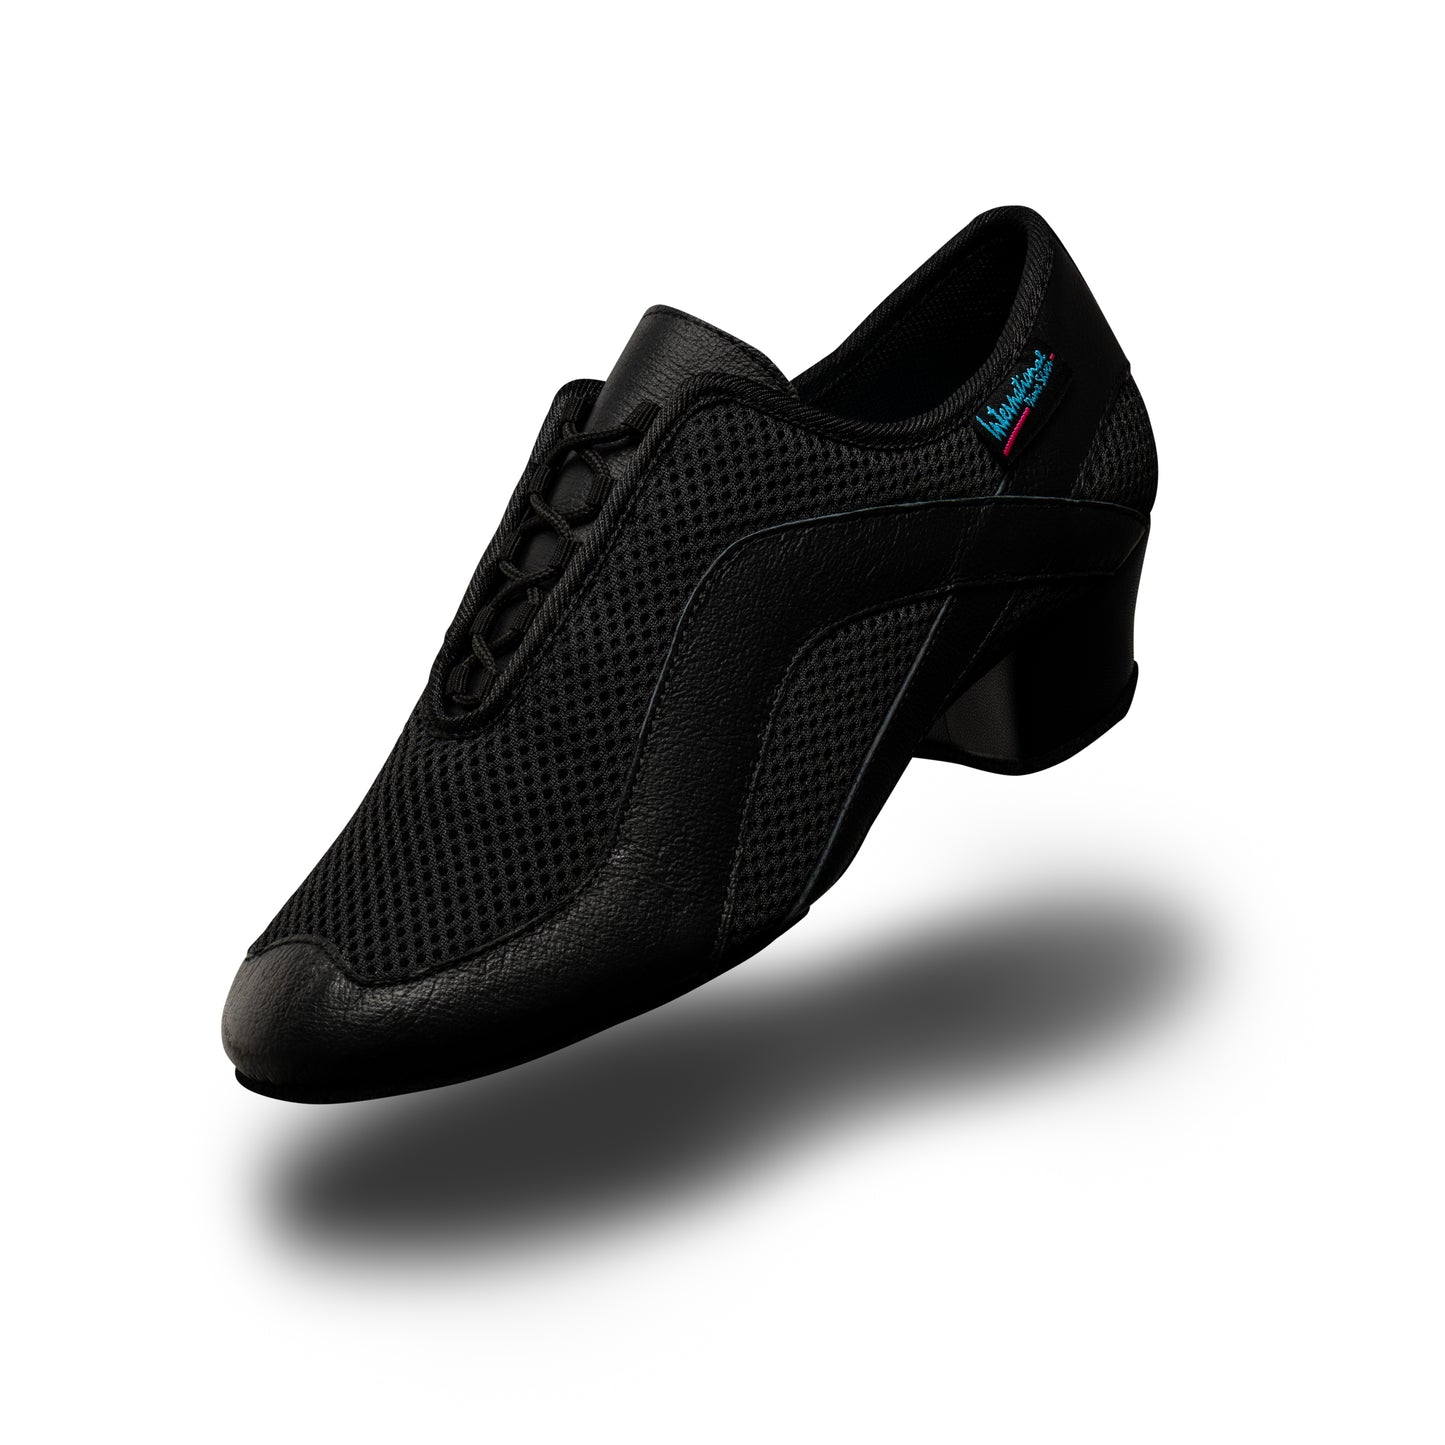 International Dance Shoes Fusion SS Black Leather and AirMesh Practice or Teaching Shoe in Stock